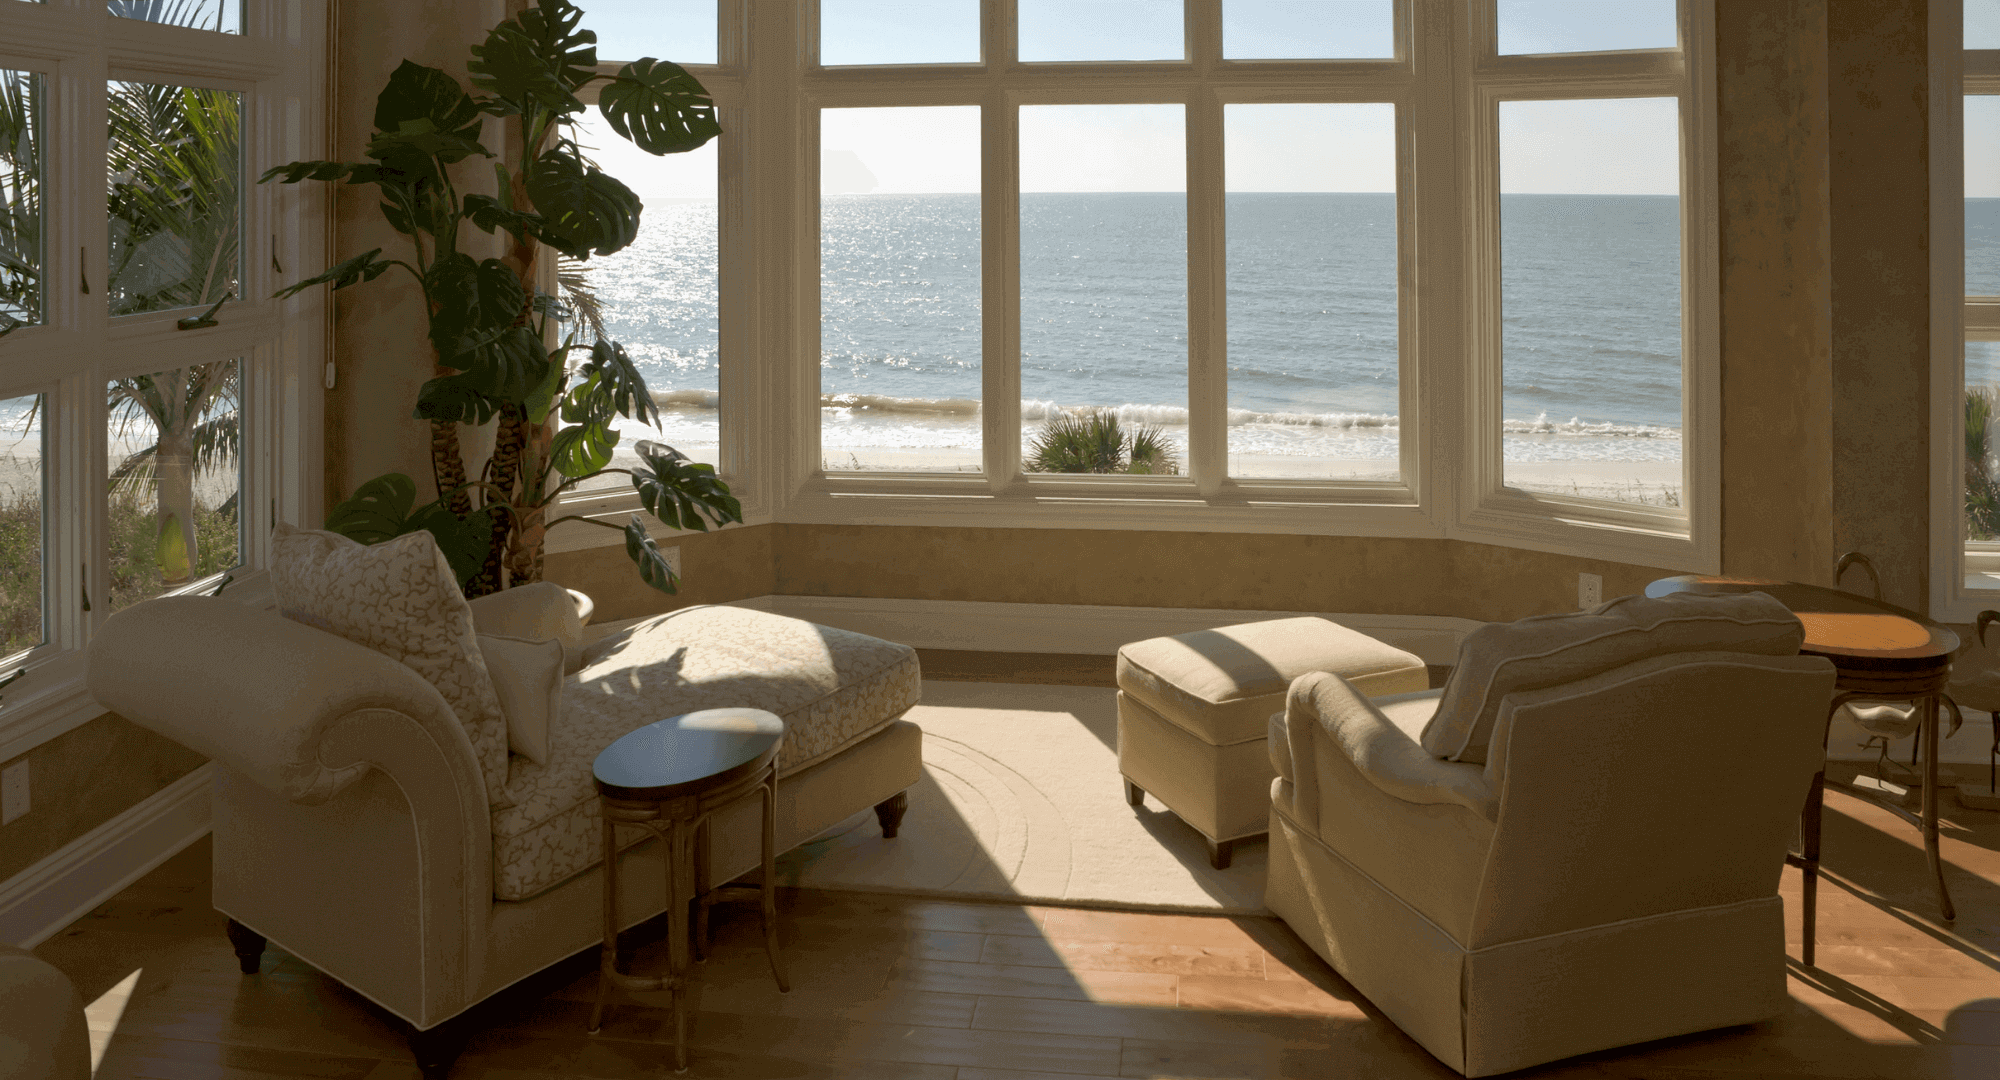 Living room in beach house with sea view